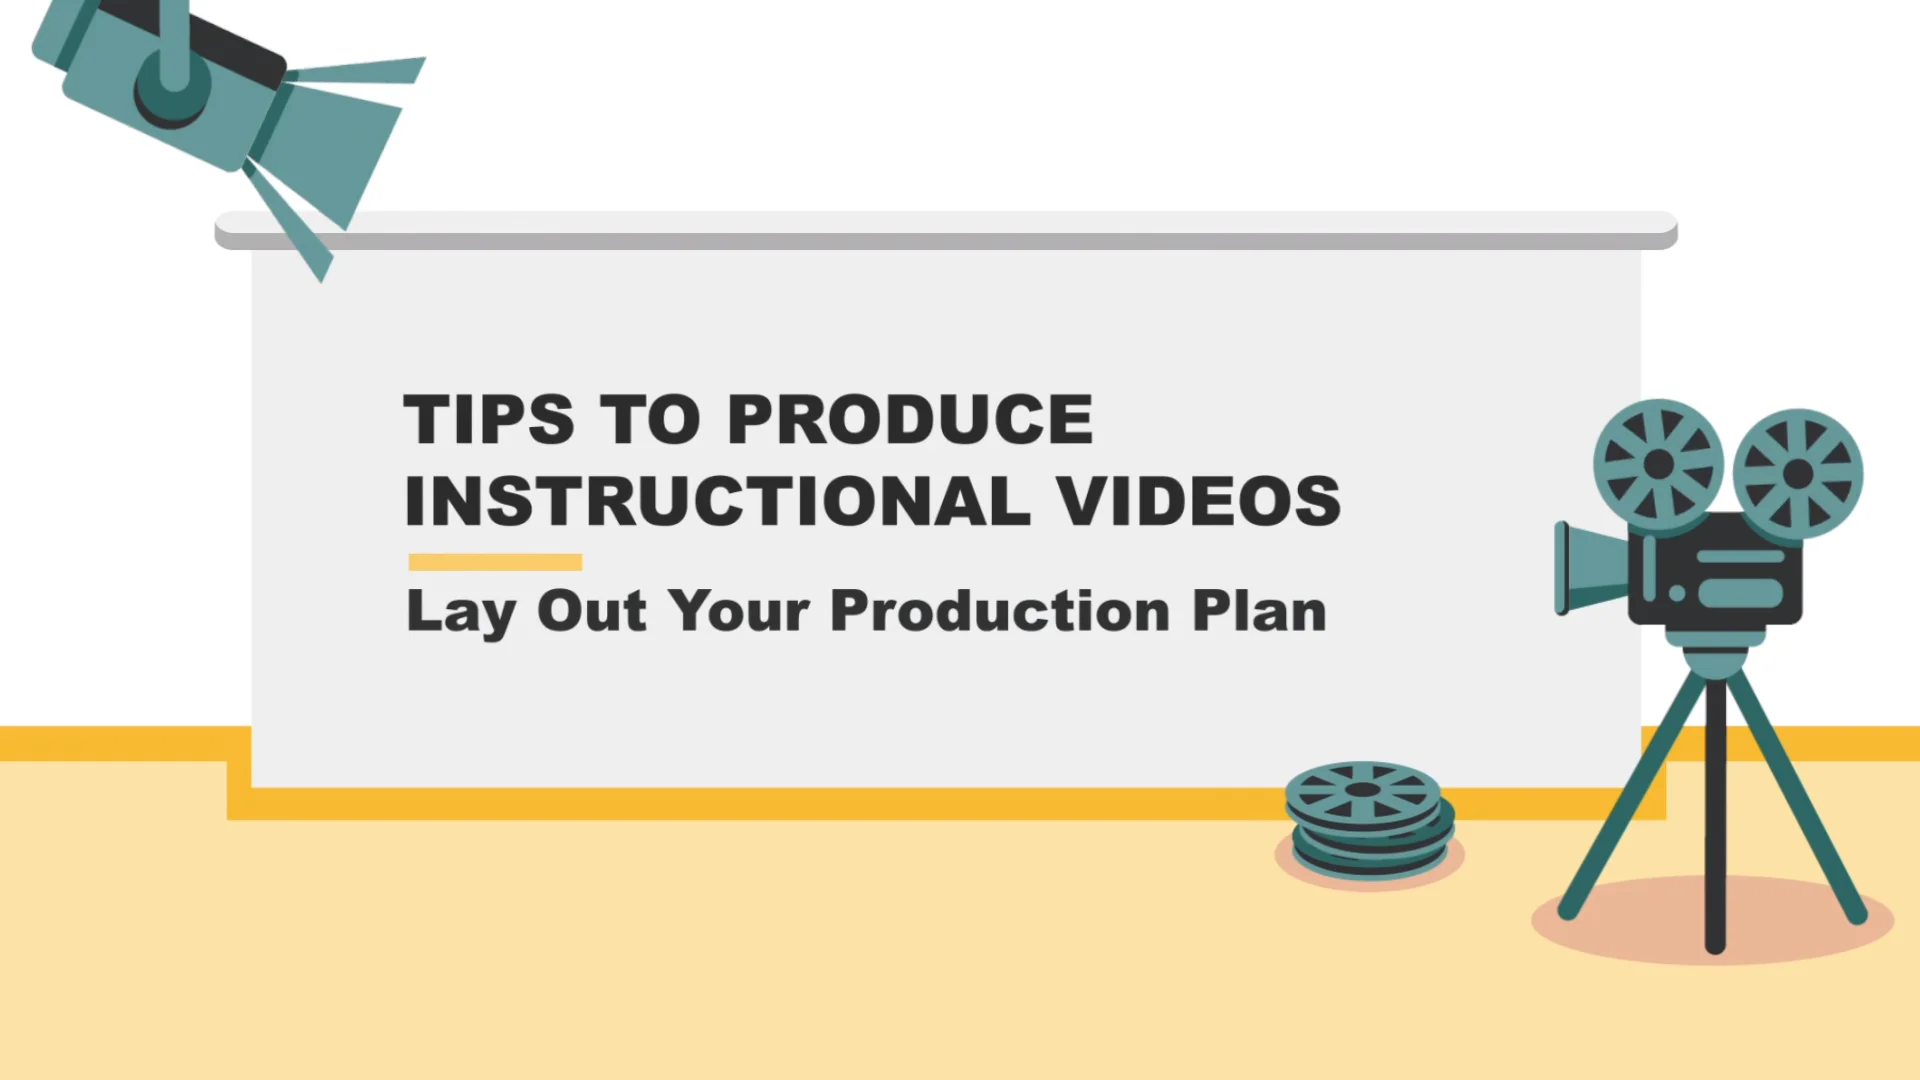 TIPS TO PRODUCE INSTRUCTIONAL VIDEOS - Step 3 : Lay Out Your